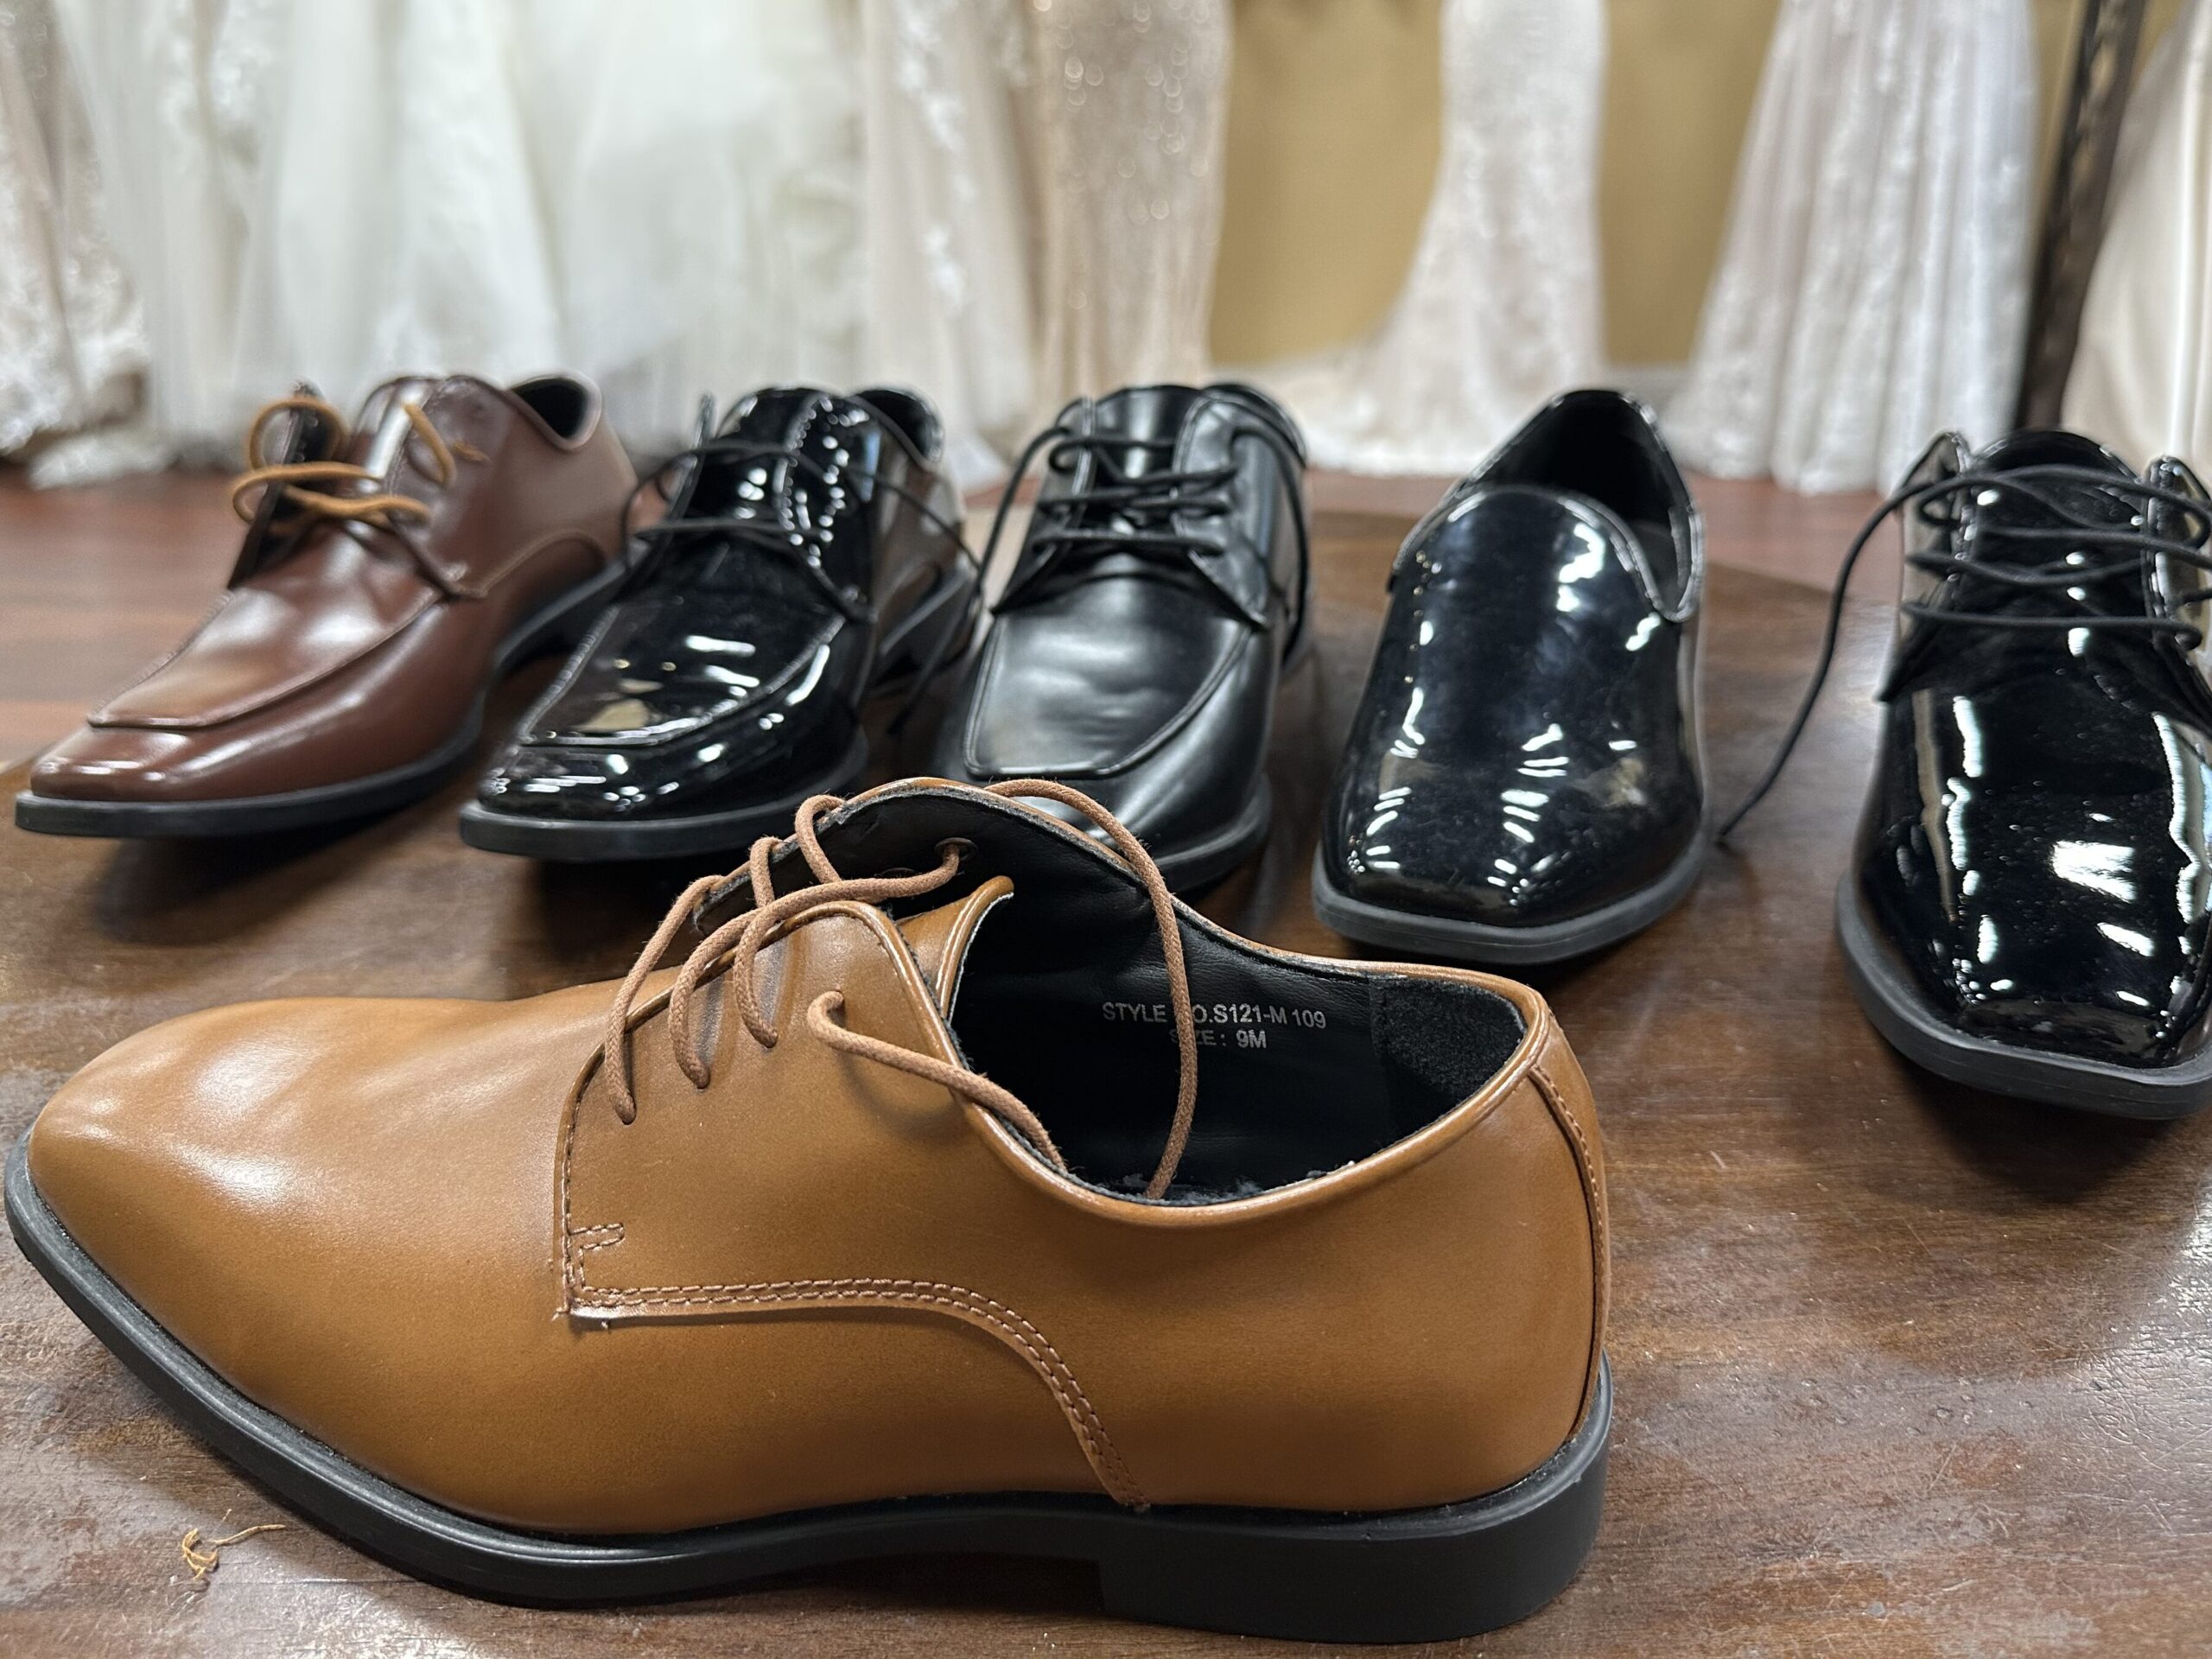 Men's formal wear shoes available for rent at Darianna Bridal & Tuxedo